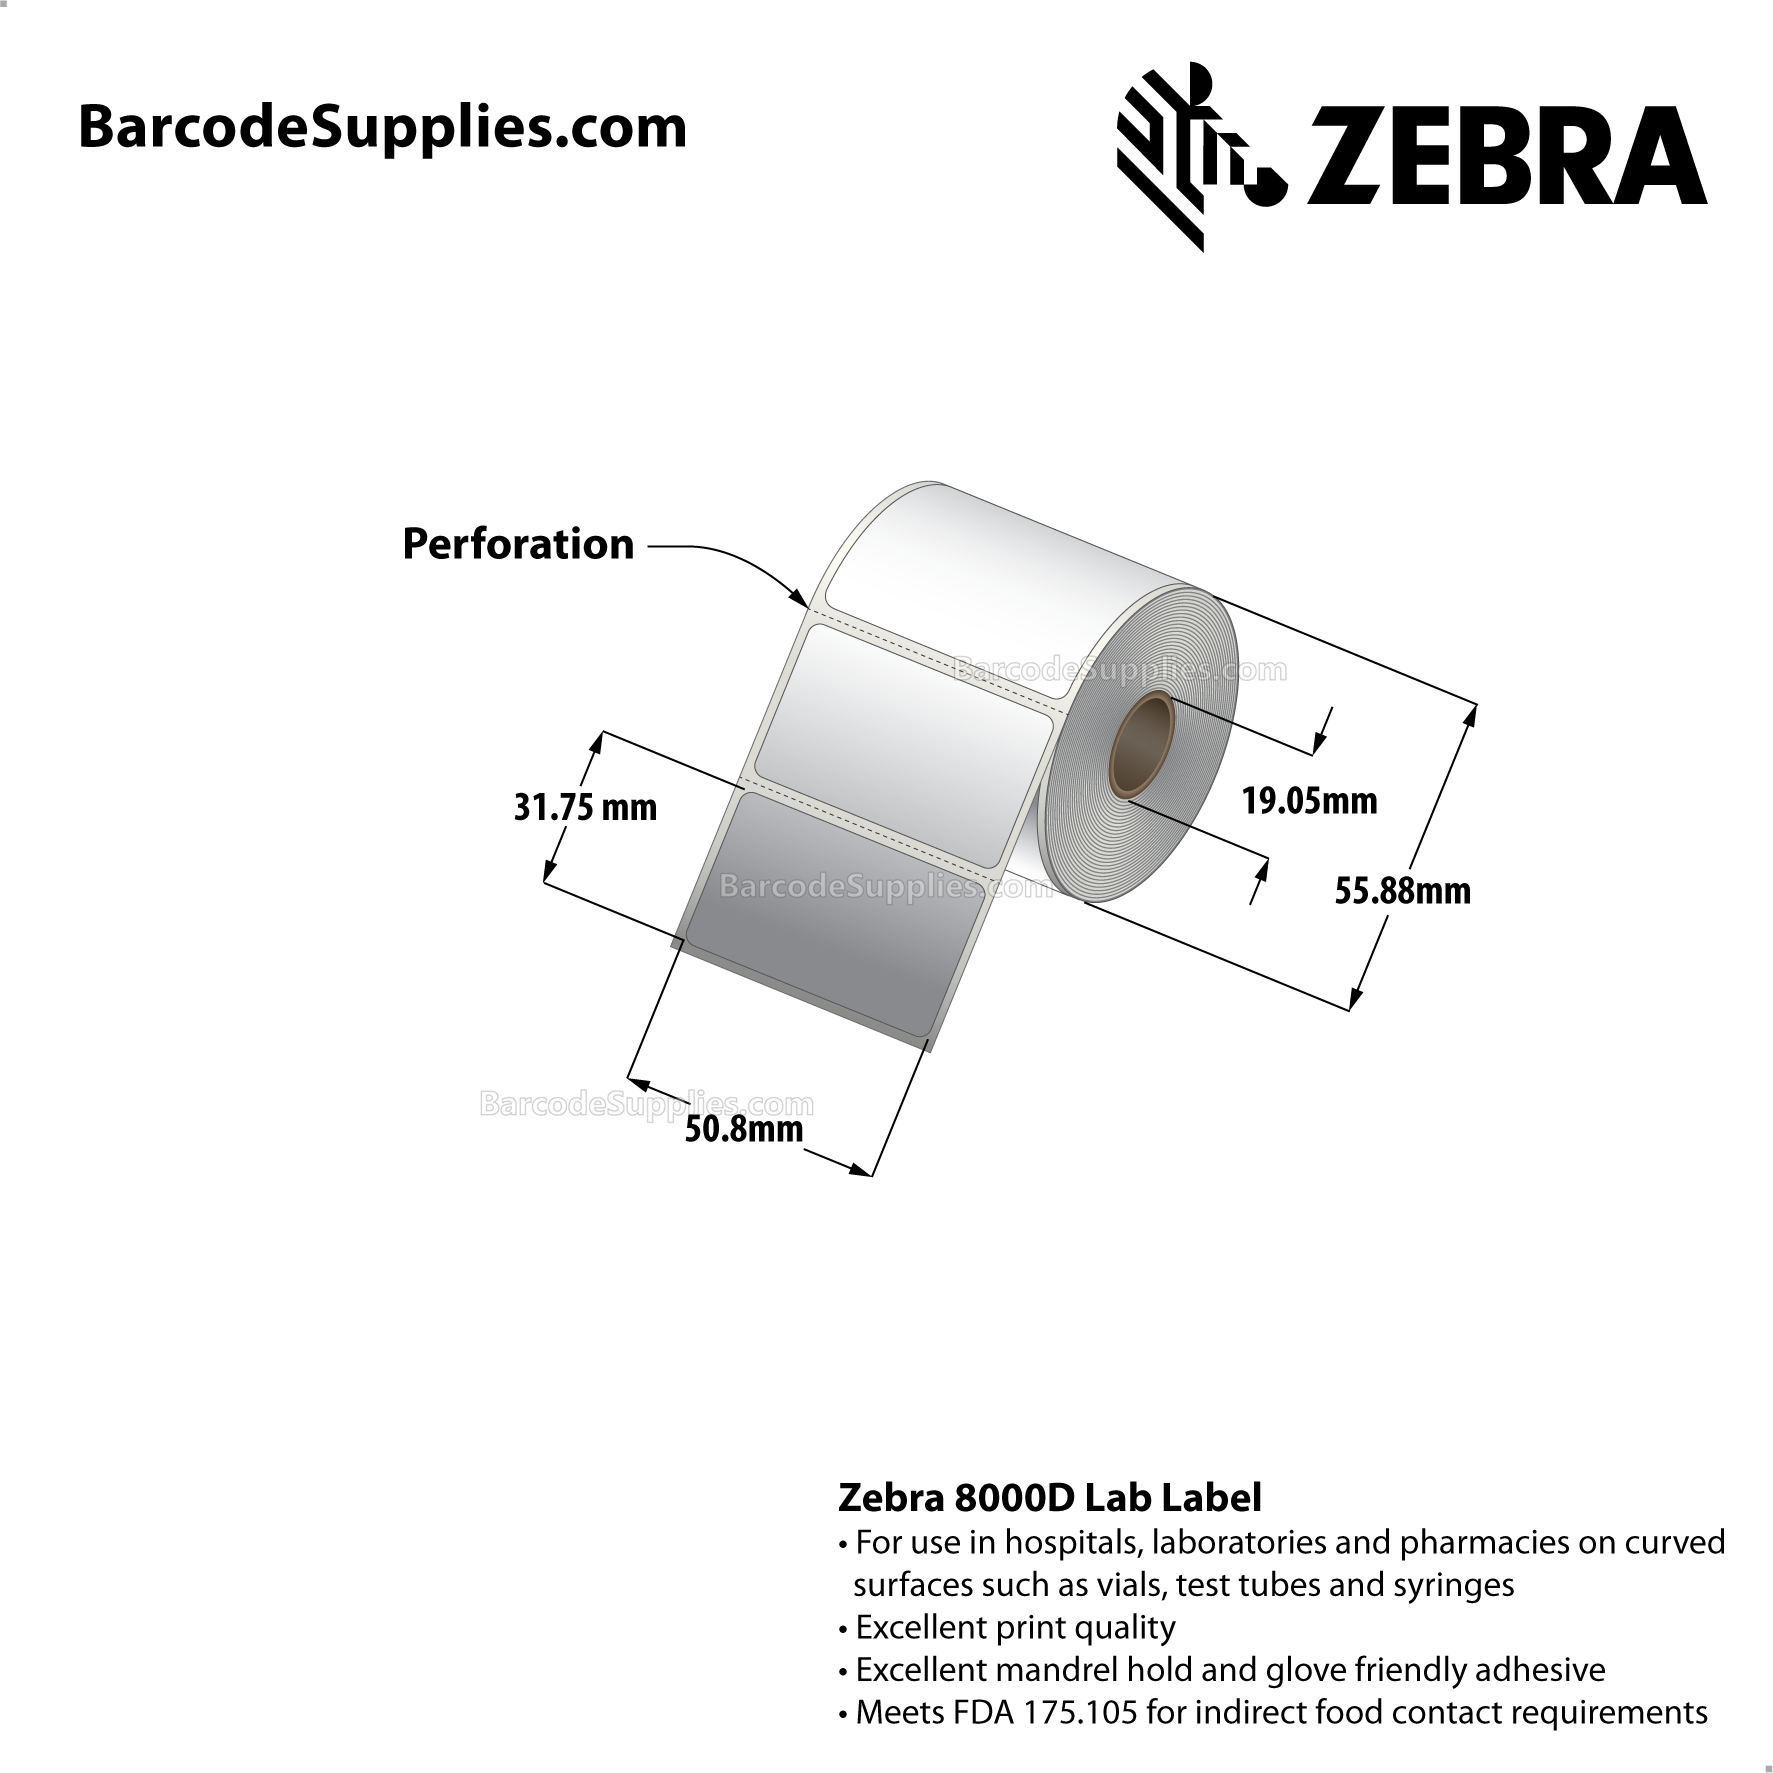 2 x 1.25 Direct Thermal White 8000D Lab Labels With Permanent Adhesive - Mobile specimen collection label for Meditech - Perforated - 330 Labels Per Roll - Carton Of 12 Rolls - 3960 Labels Total - MPN: 10015772